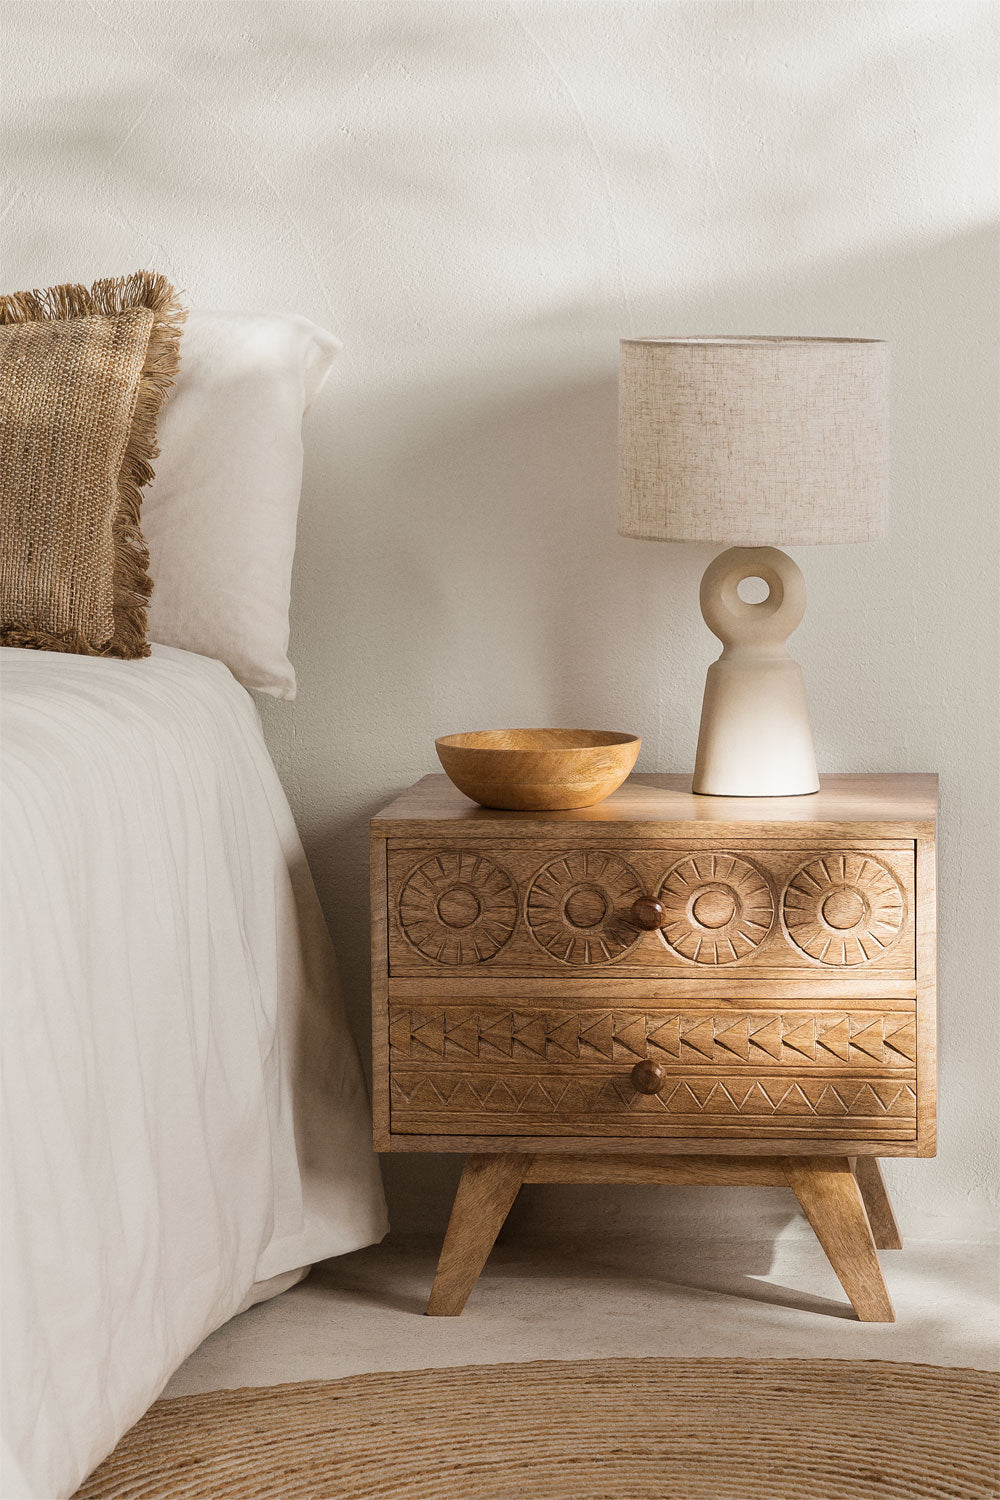 Handmade Indian Handcarved Stylish and Functional Mango Wood Bedside Table with Drawers: Perfect Addition to Your Bedroom